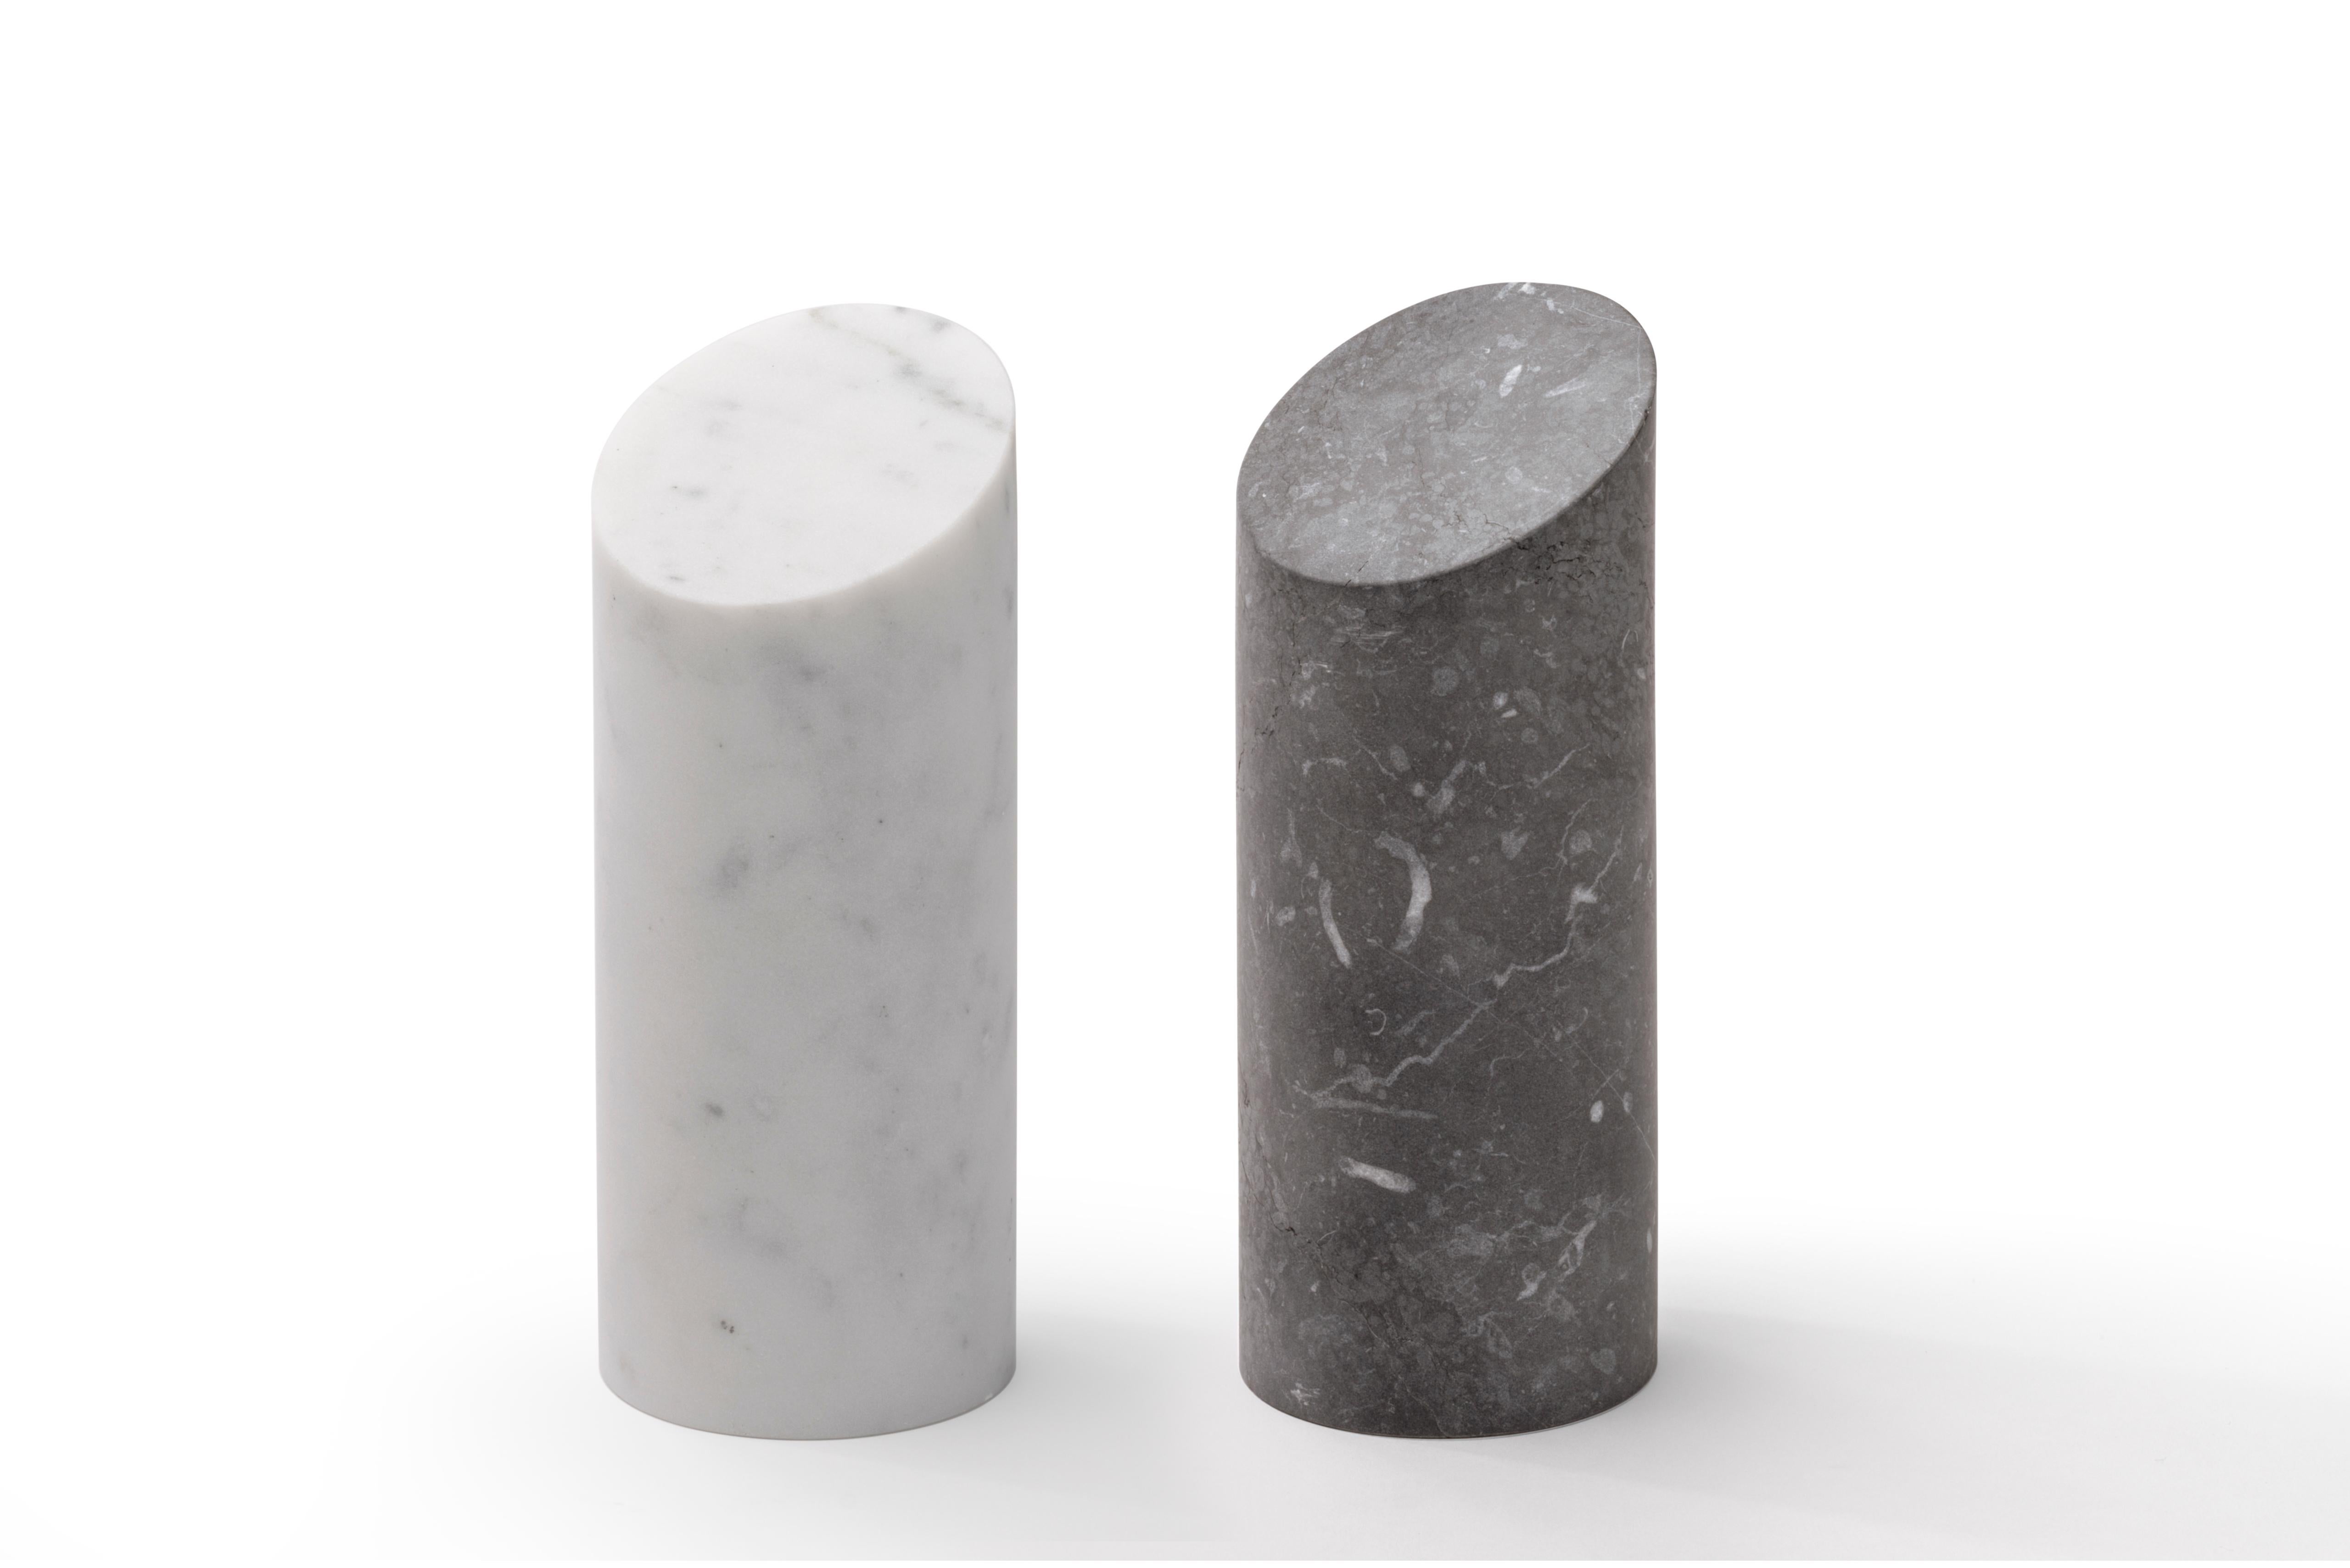 A collection of elegant paperweights in natural stone designed by Elisa Ossino for Salvatori. These pieces play with the simplicity of geometry in their cylindrical and cubed forms. Available in Classic white Bianco Carrara and striking black Nero